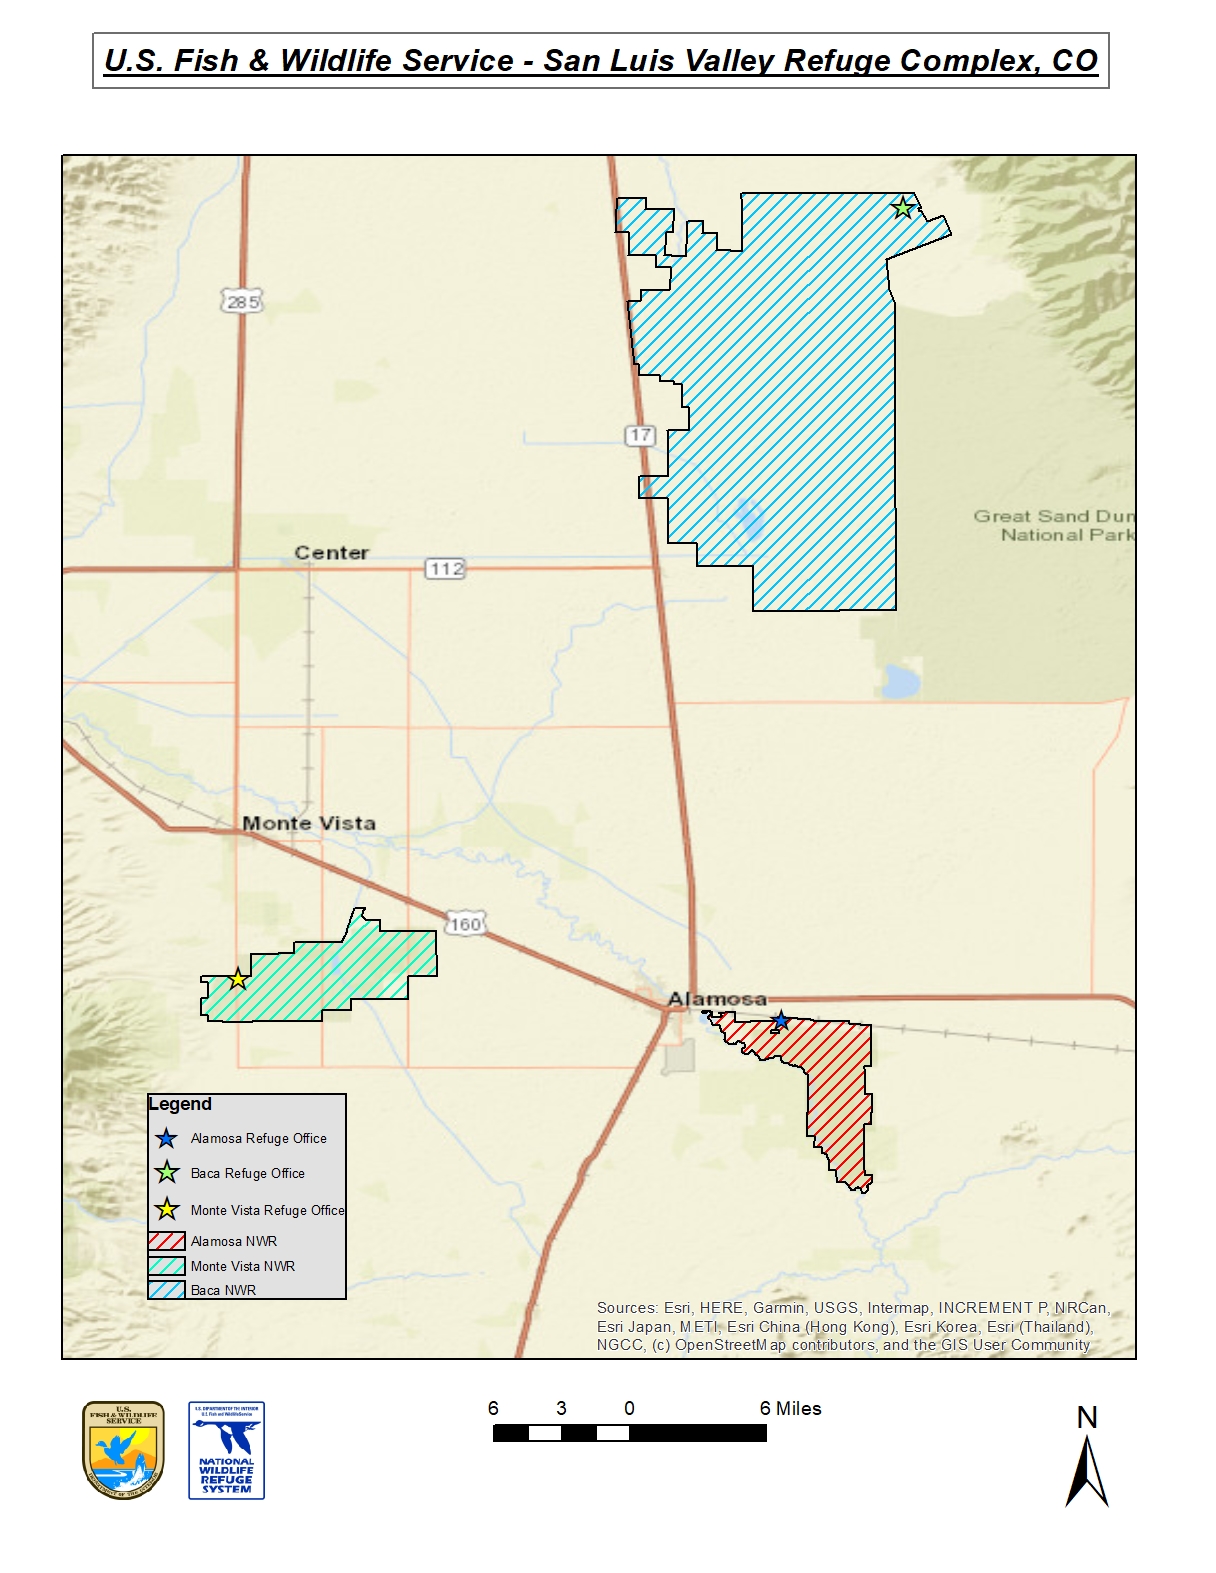 Map of the San Luis Valley Refuge Complex in Colorado